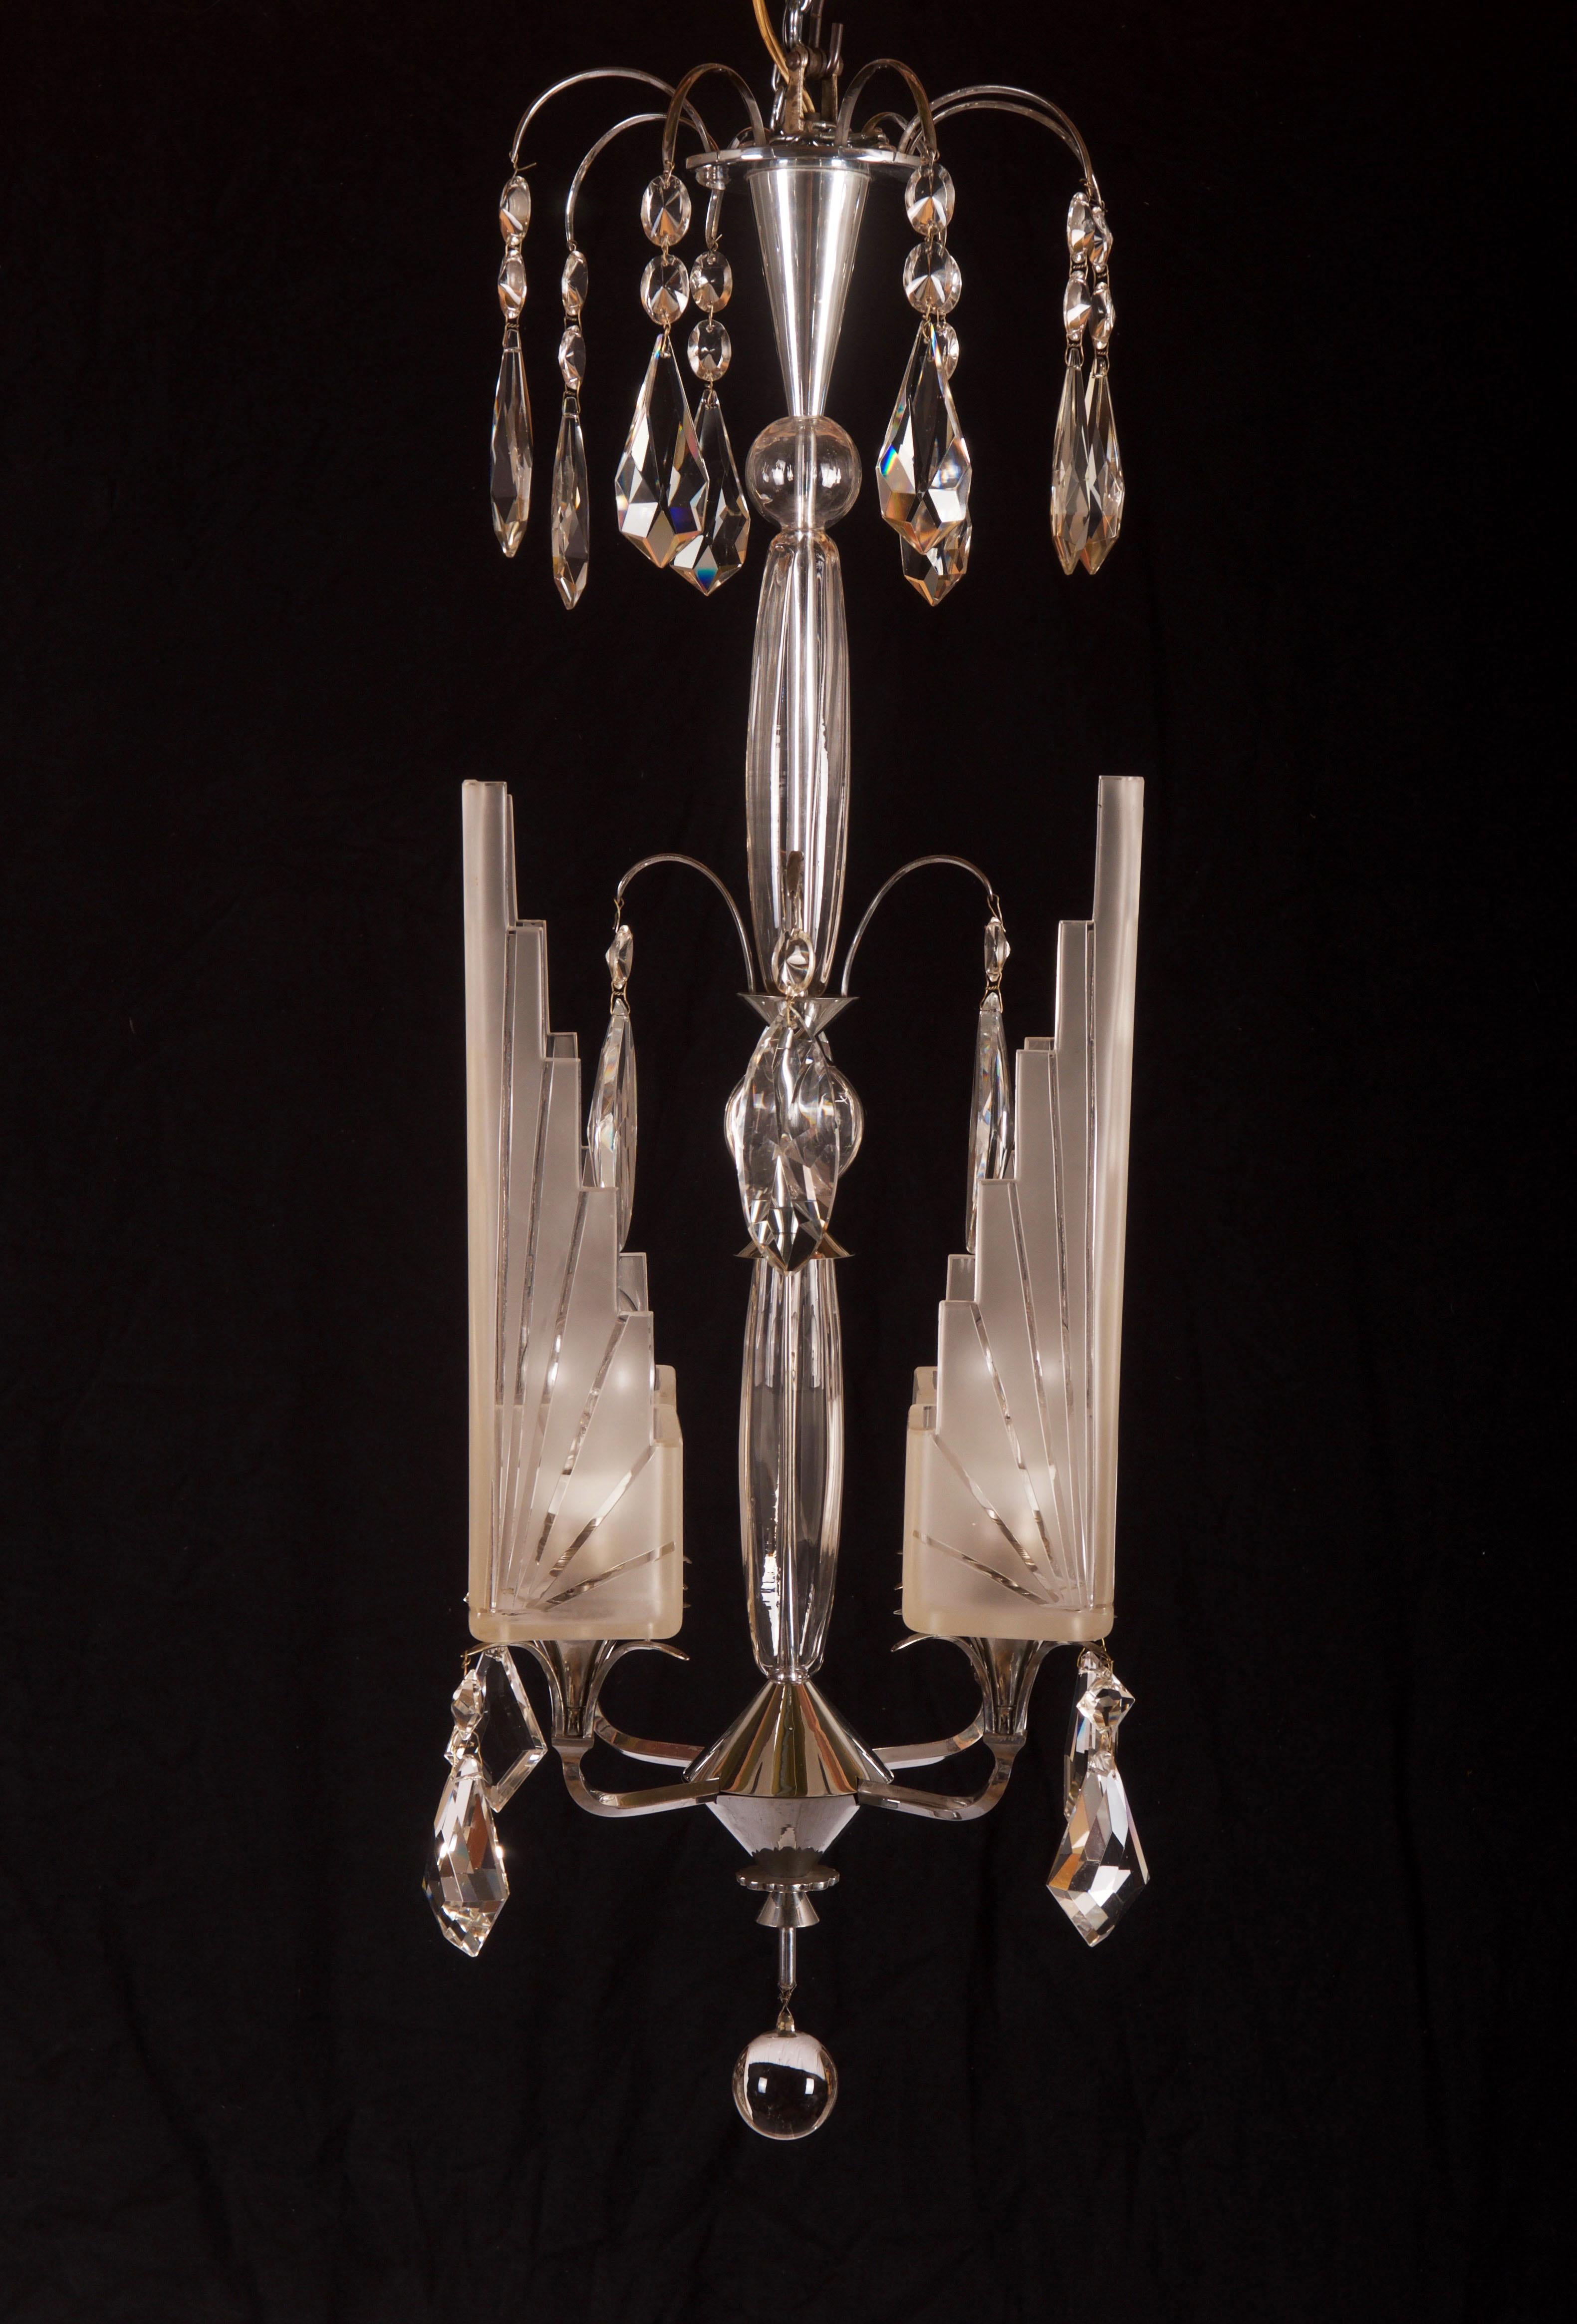 Beautiful French Art Deco chandelier from the 1920s with four light arms with shades of frosted glass with beam grinders, stem and prisms of glass, frame and top of nickel-plated metal. One of the glasses has a small glass crack (see the last two